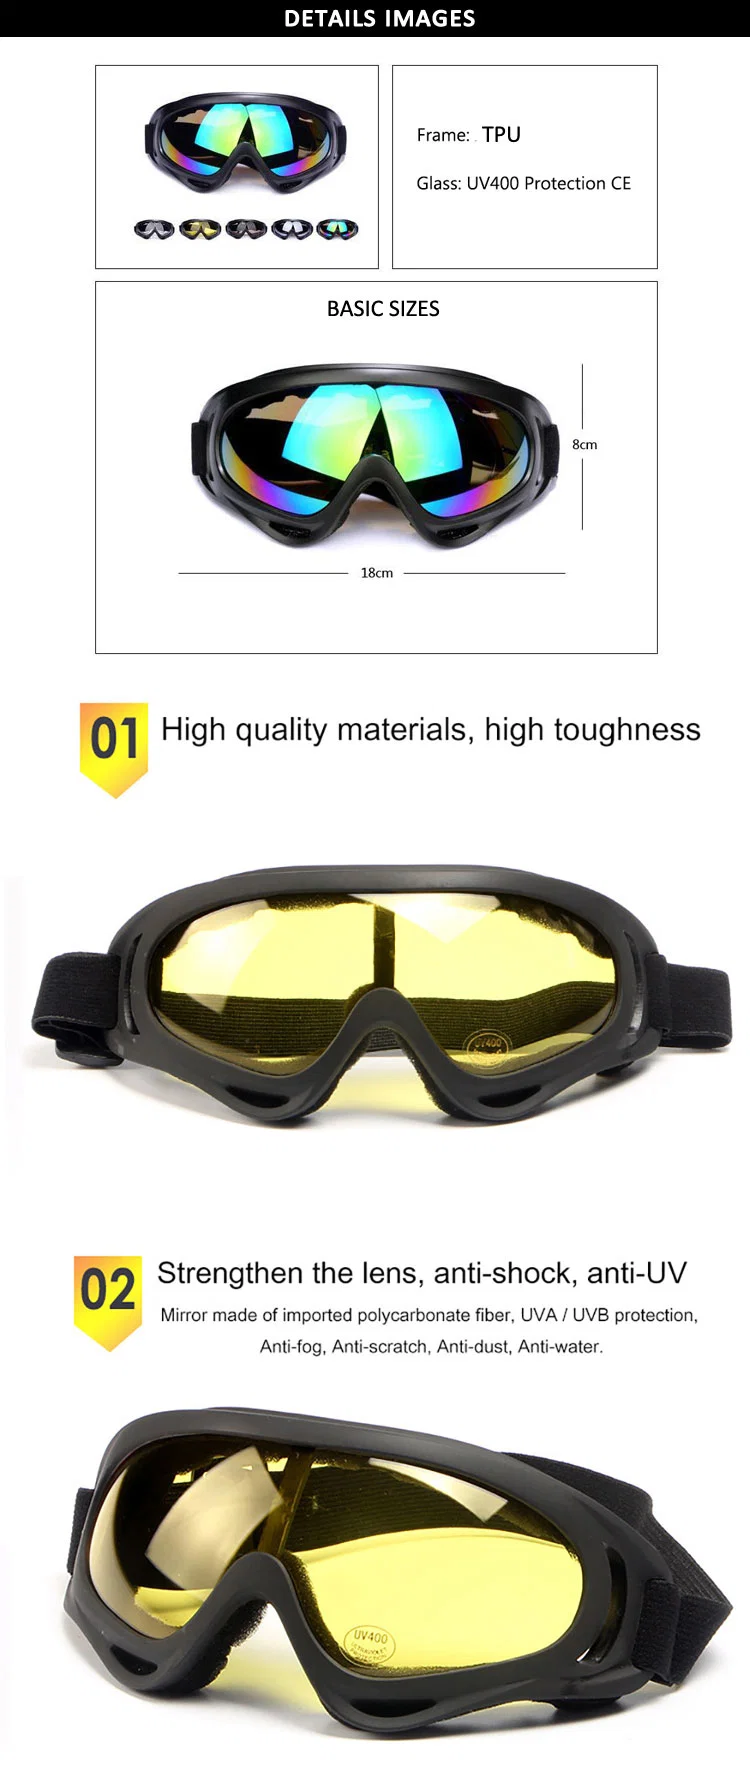 Outdoor Cycling Protective Sport Ski Goggles